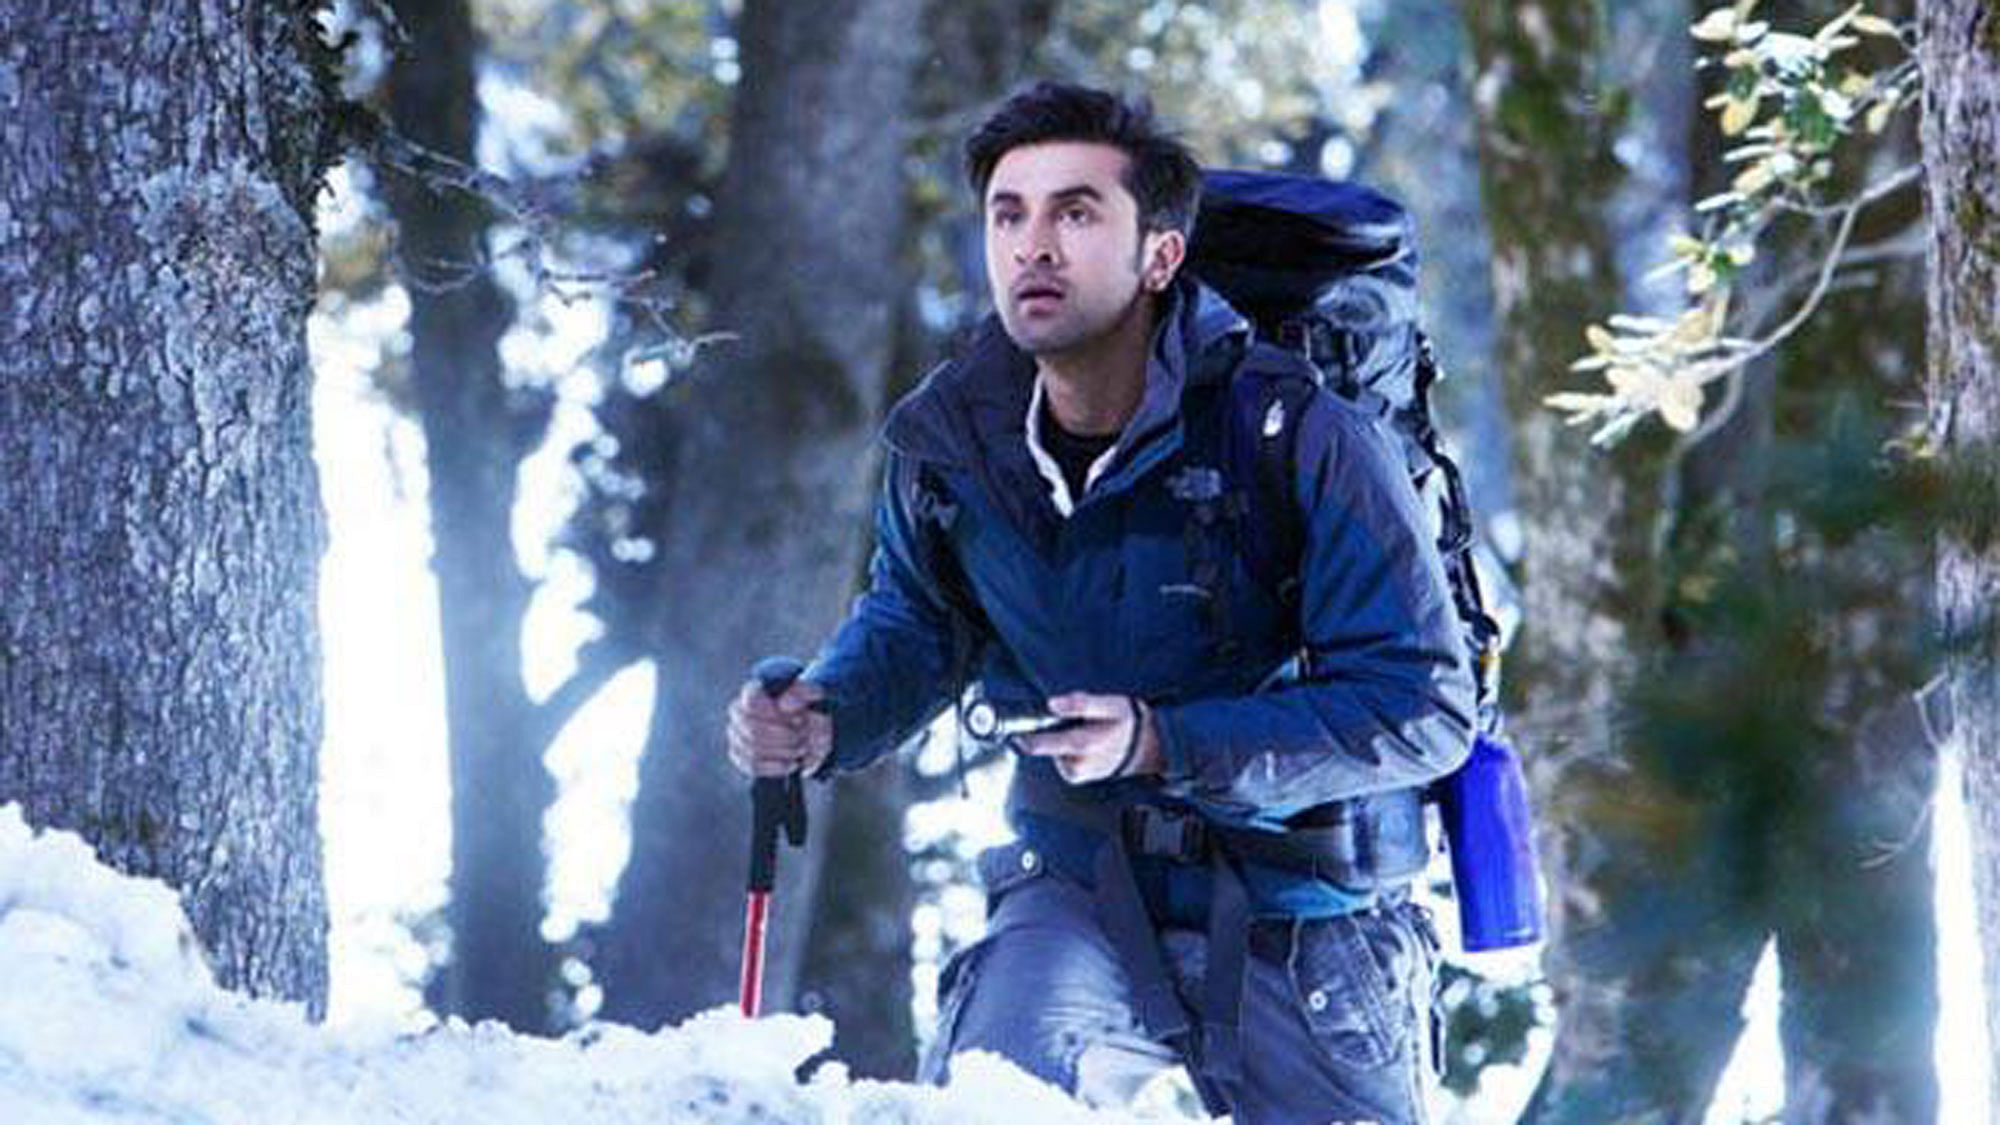 Trekking isn’t like taking a vacation – there are certain rules you must follow! (Photo Courtesy: <a href="https://www.facebook.com/YehJawaaniHaiDeewani/photos_stream">Facebook/Yeh Jawaani Hai Deewani</a>)